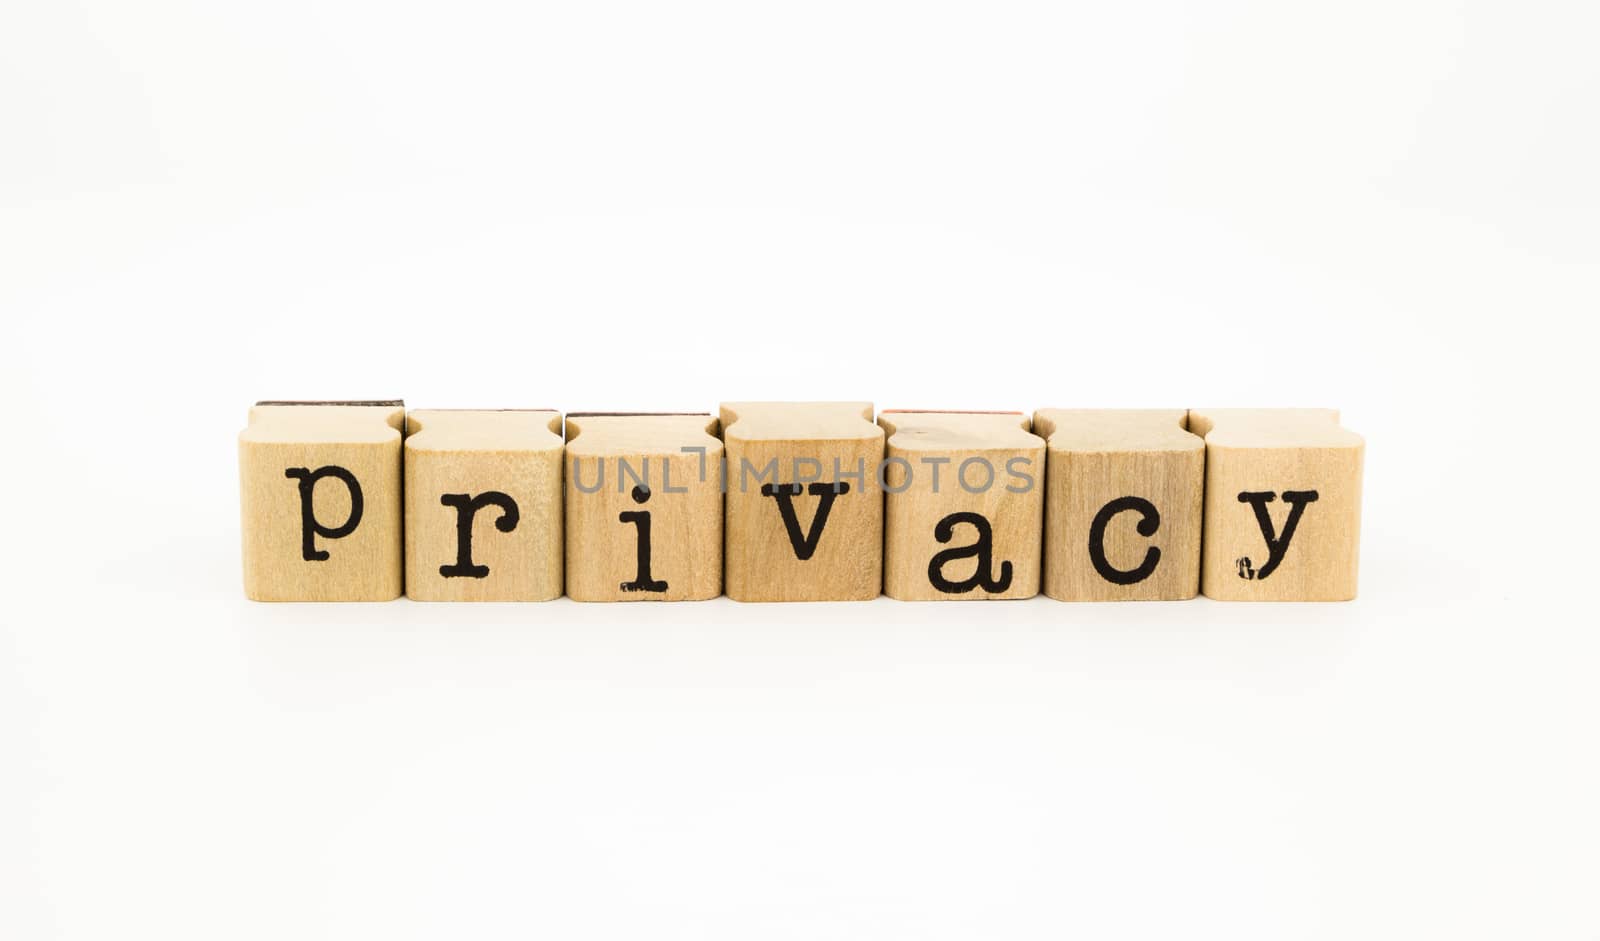 privacy wording on white background by vinnstock